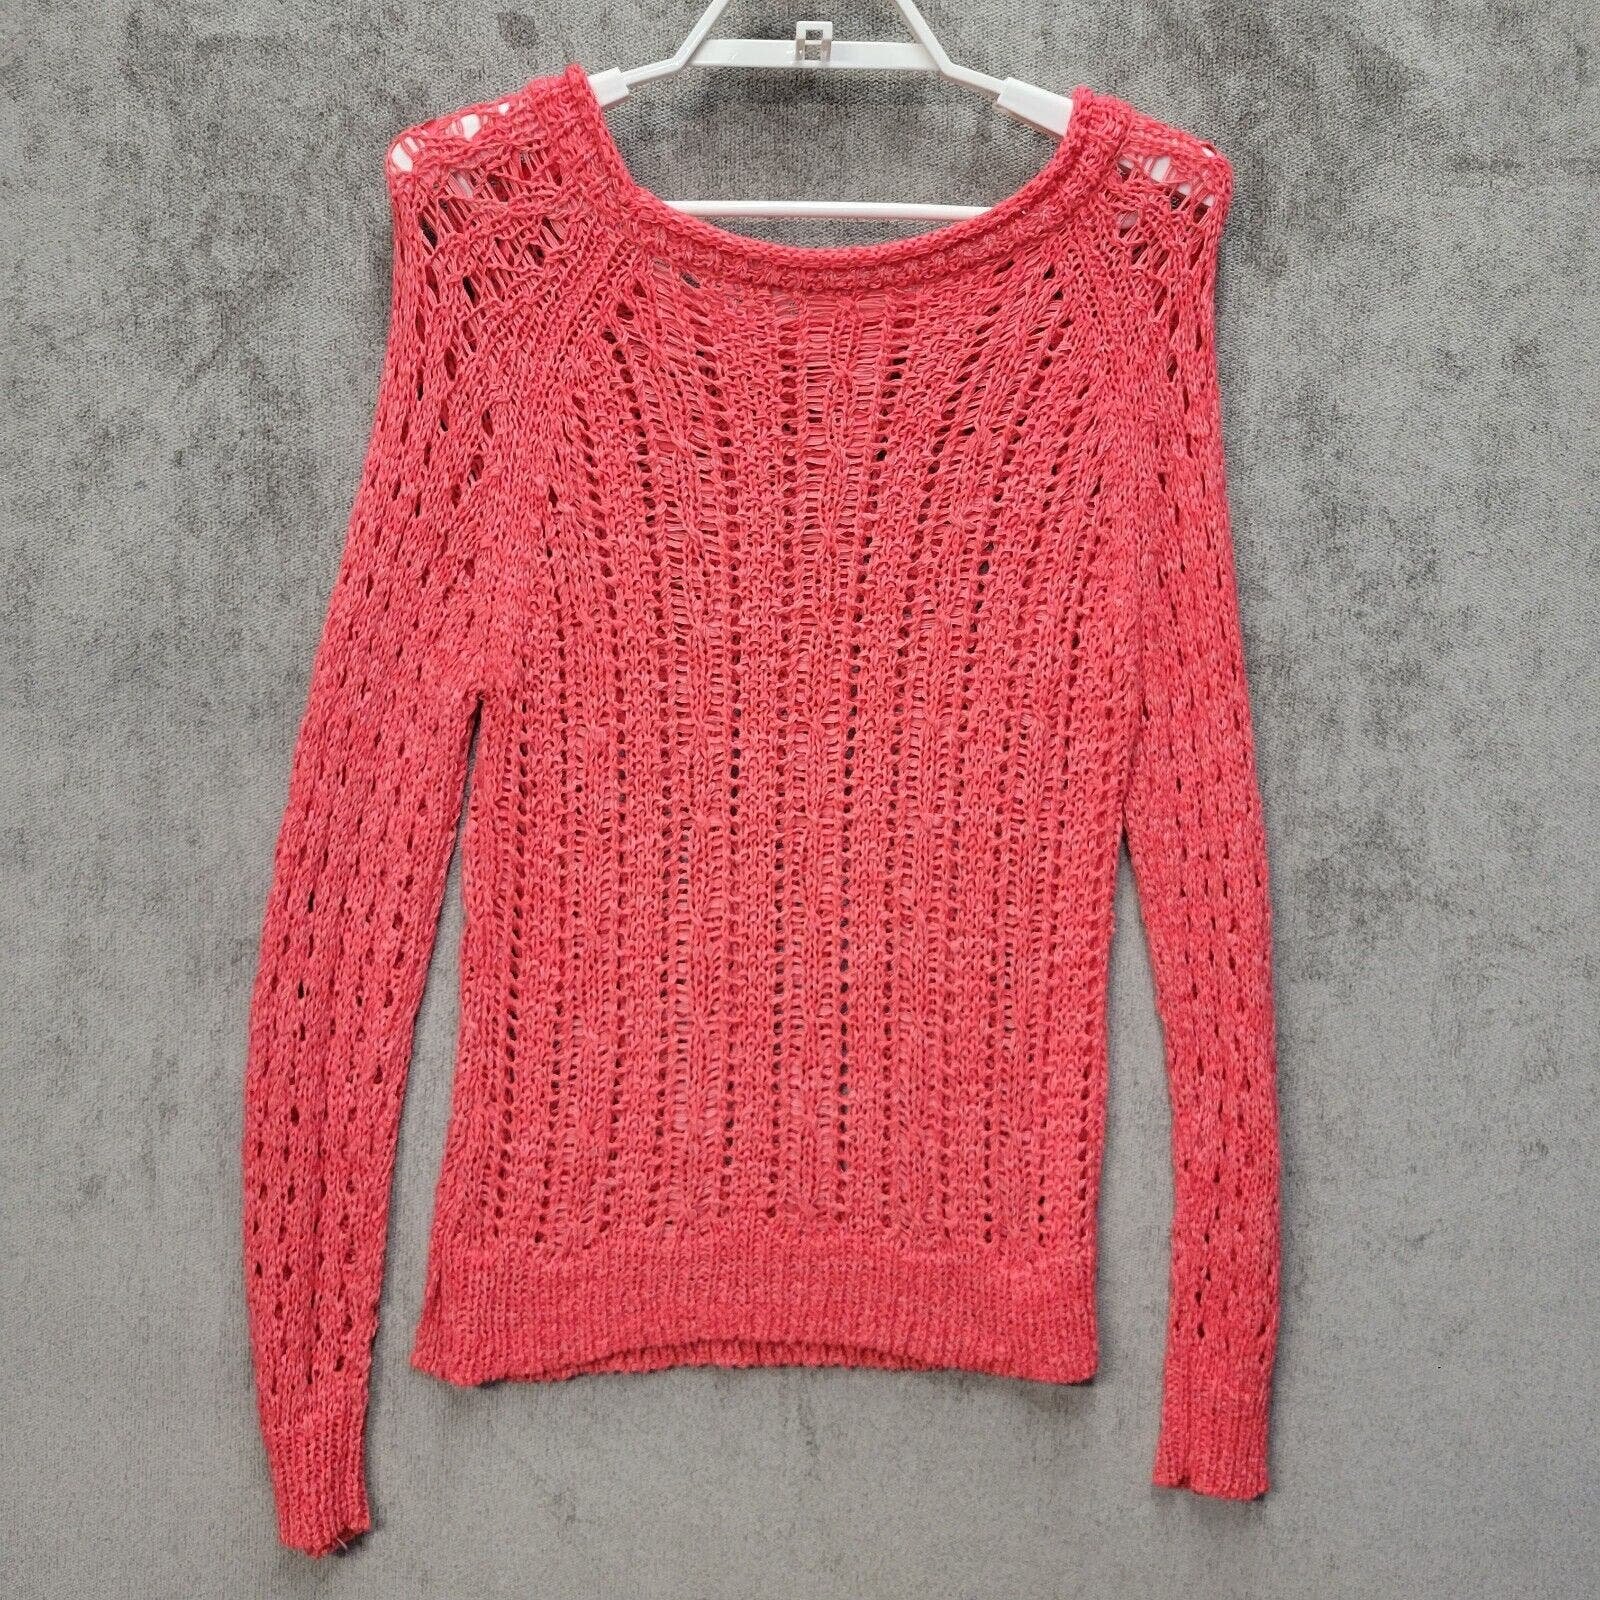 Great Cato Sweater Open Loose Knit Womens Medium Coral Round Neck Pull-Over GzX4QUFbY Online Shop